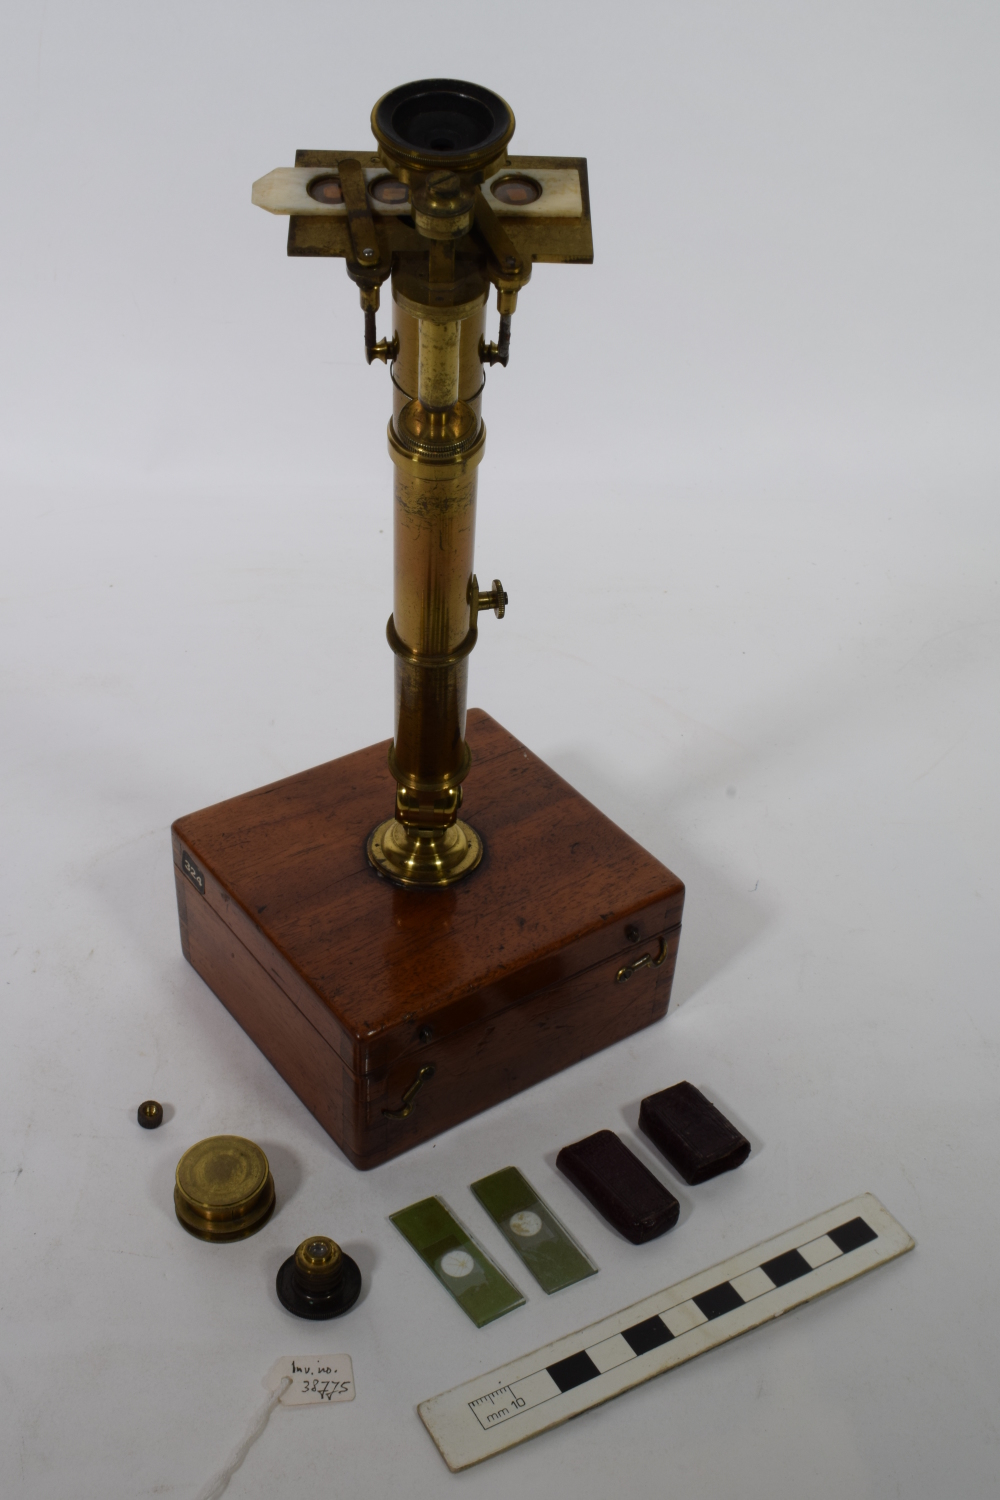 preview image for Wollaston Type Simple Pocket Microscope, by Cary, London, c. 1835